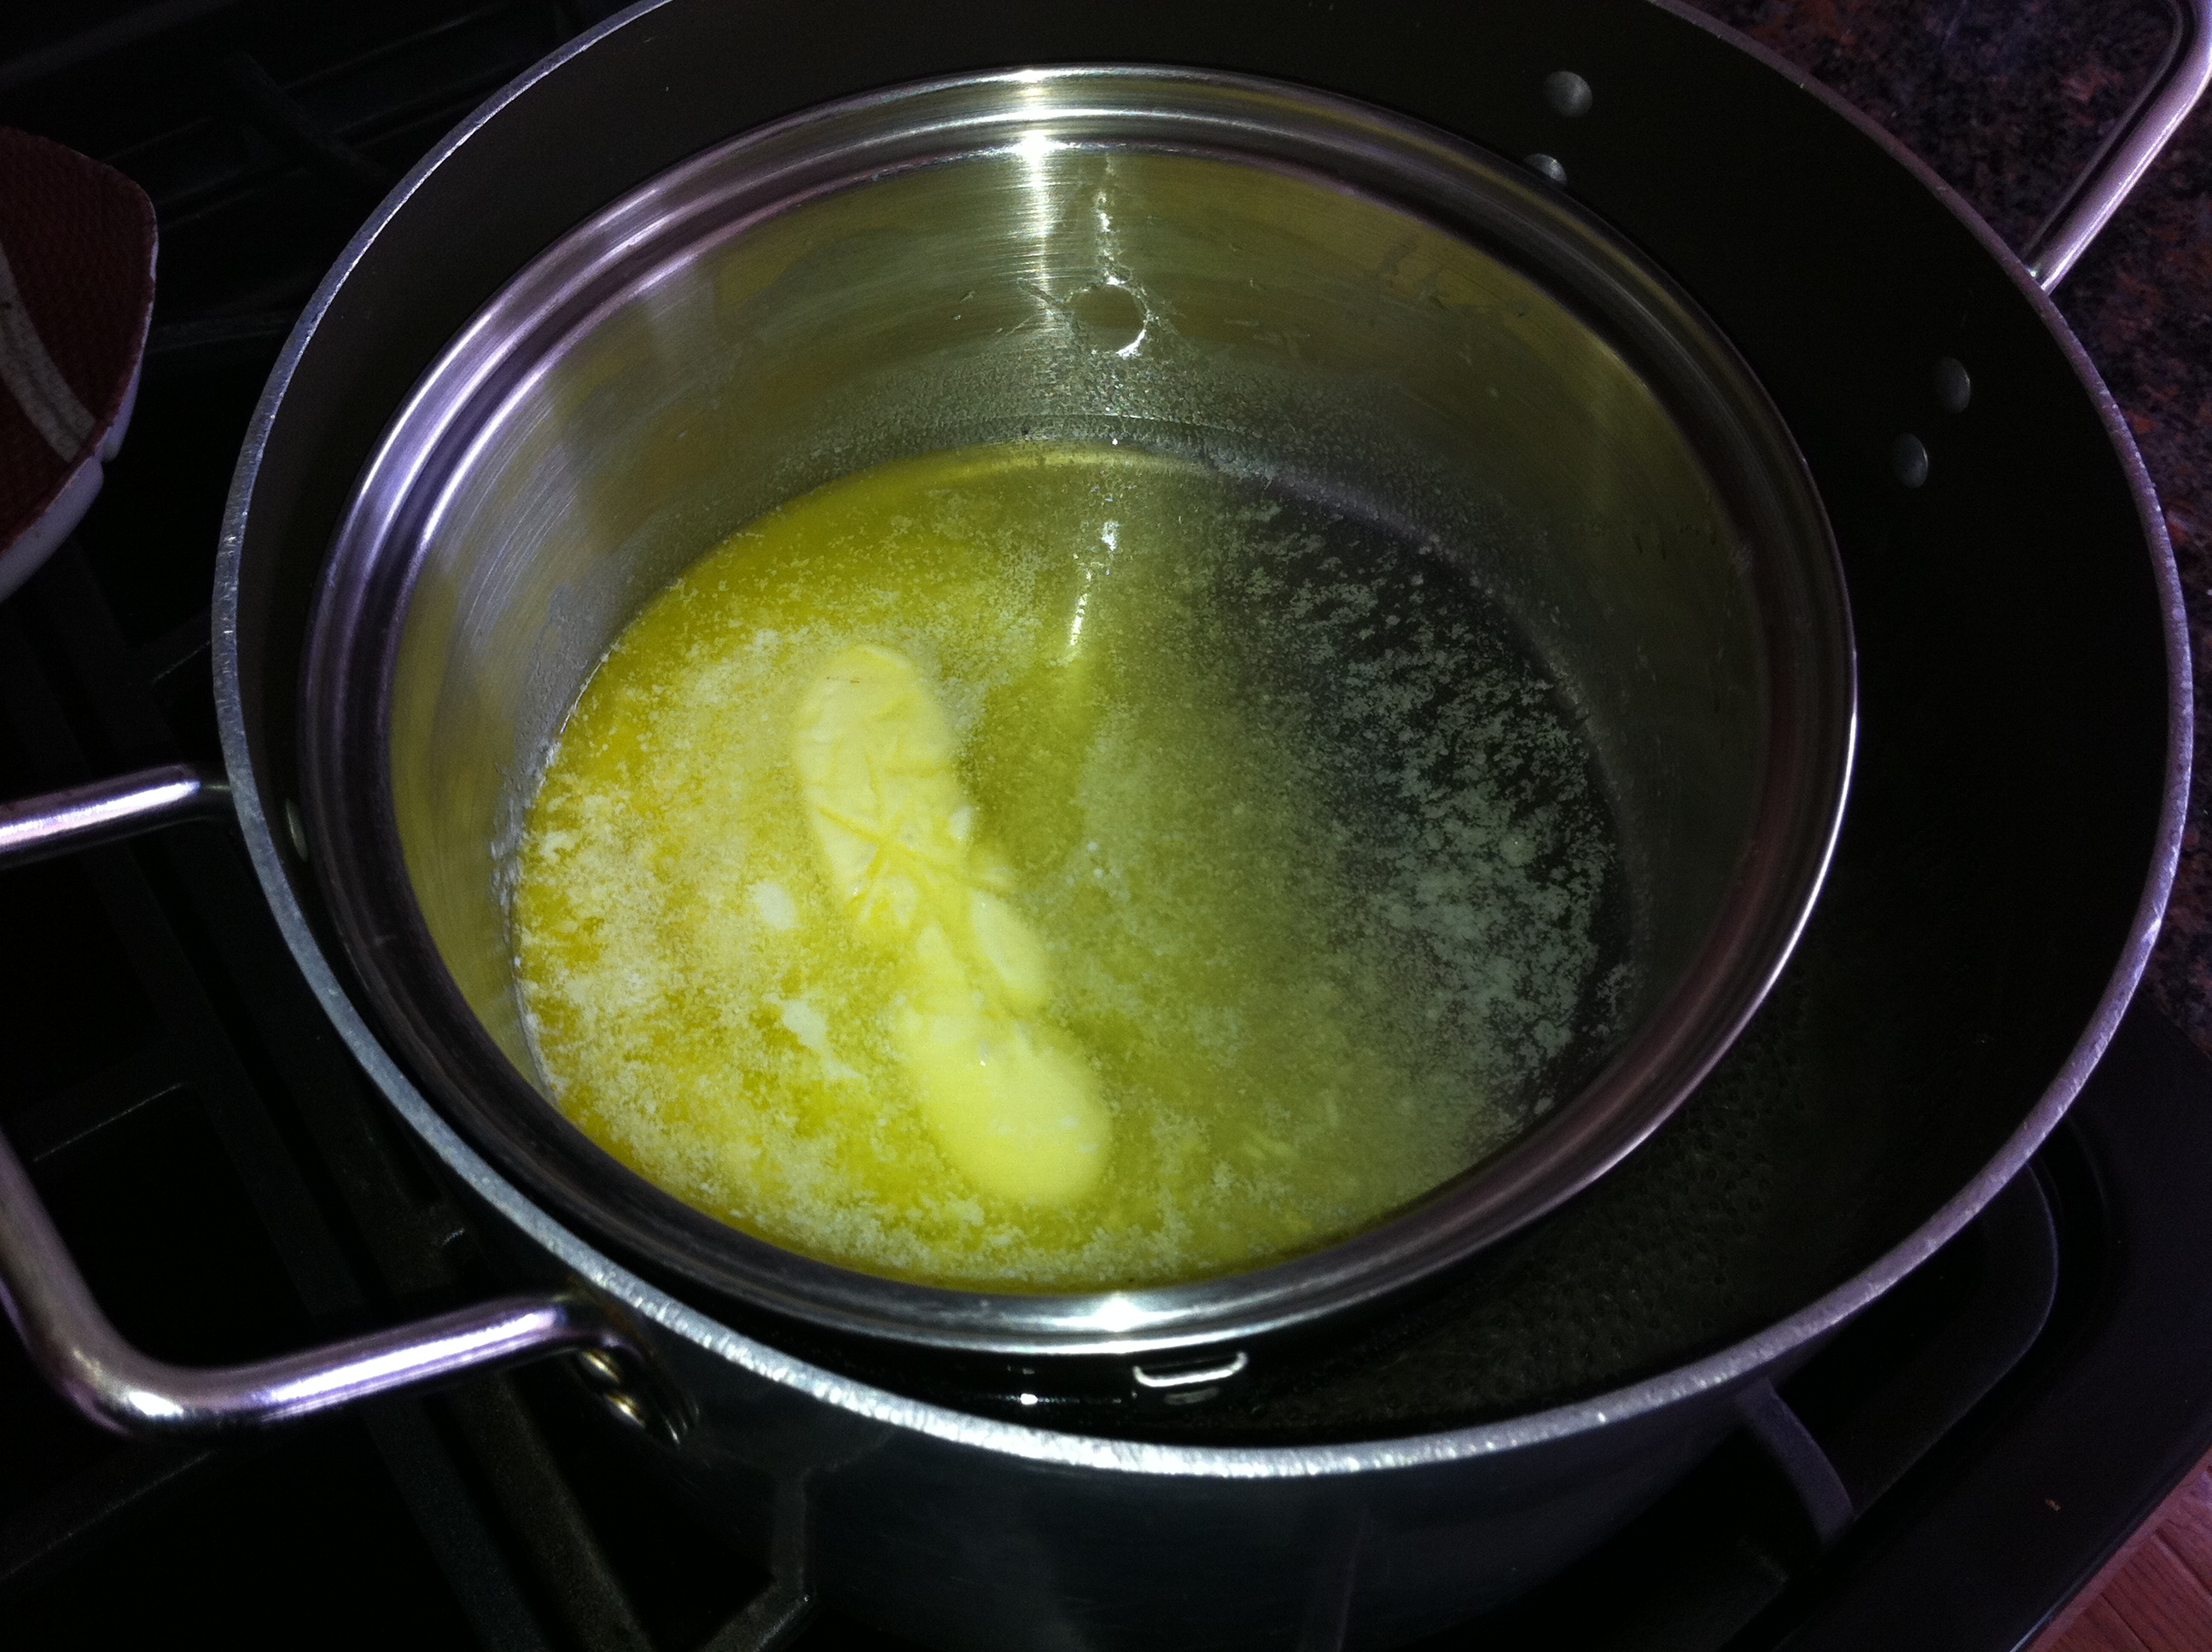 How to Make Cannabutter